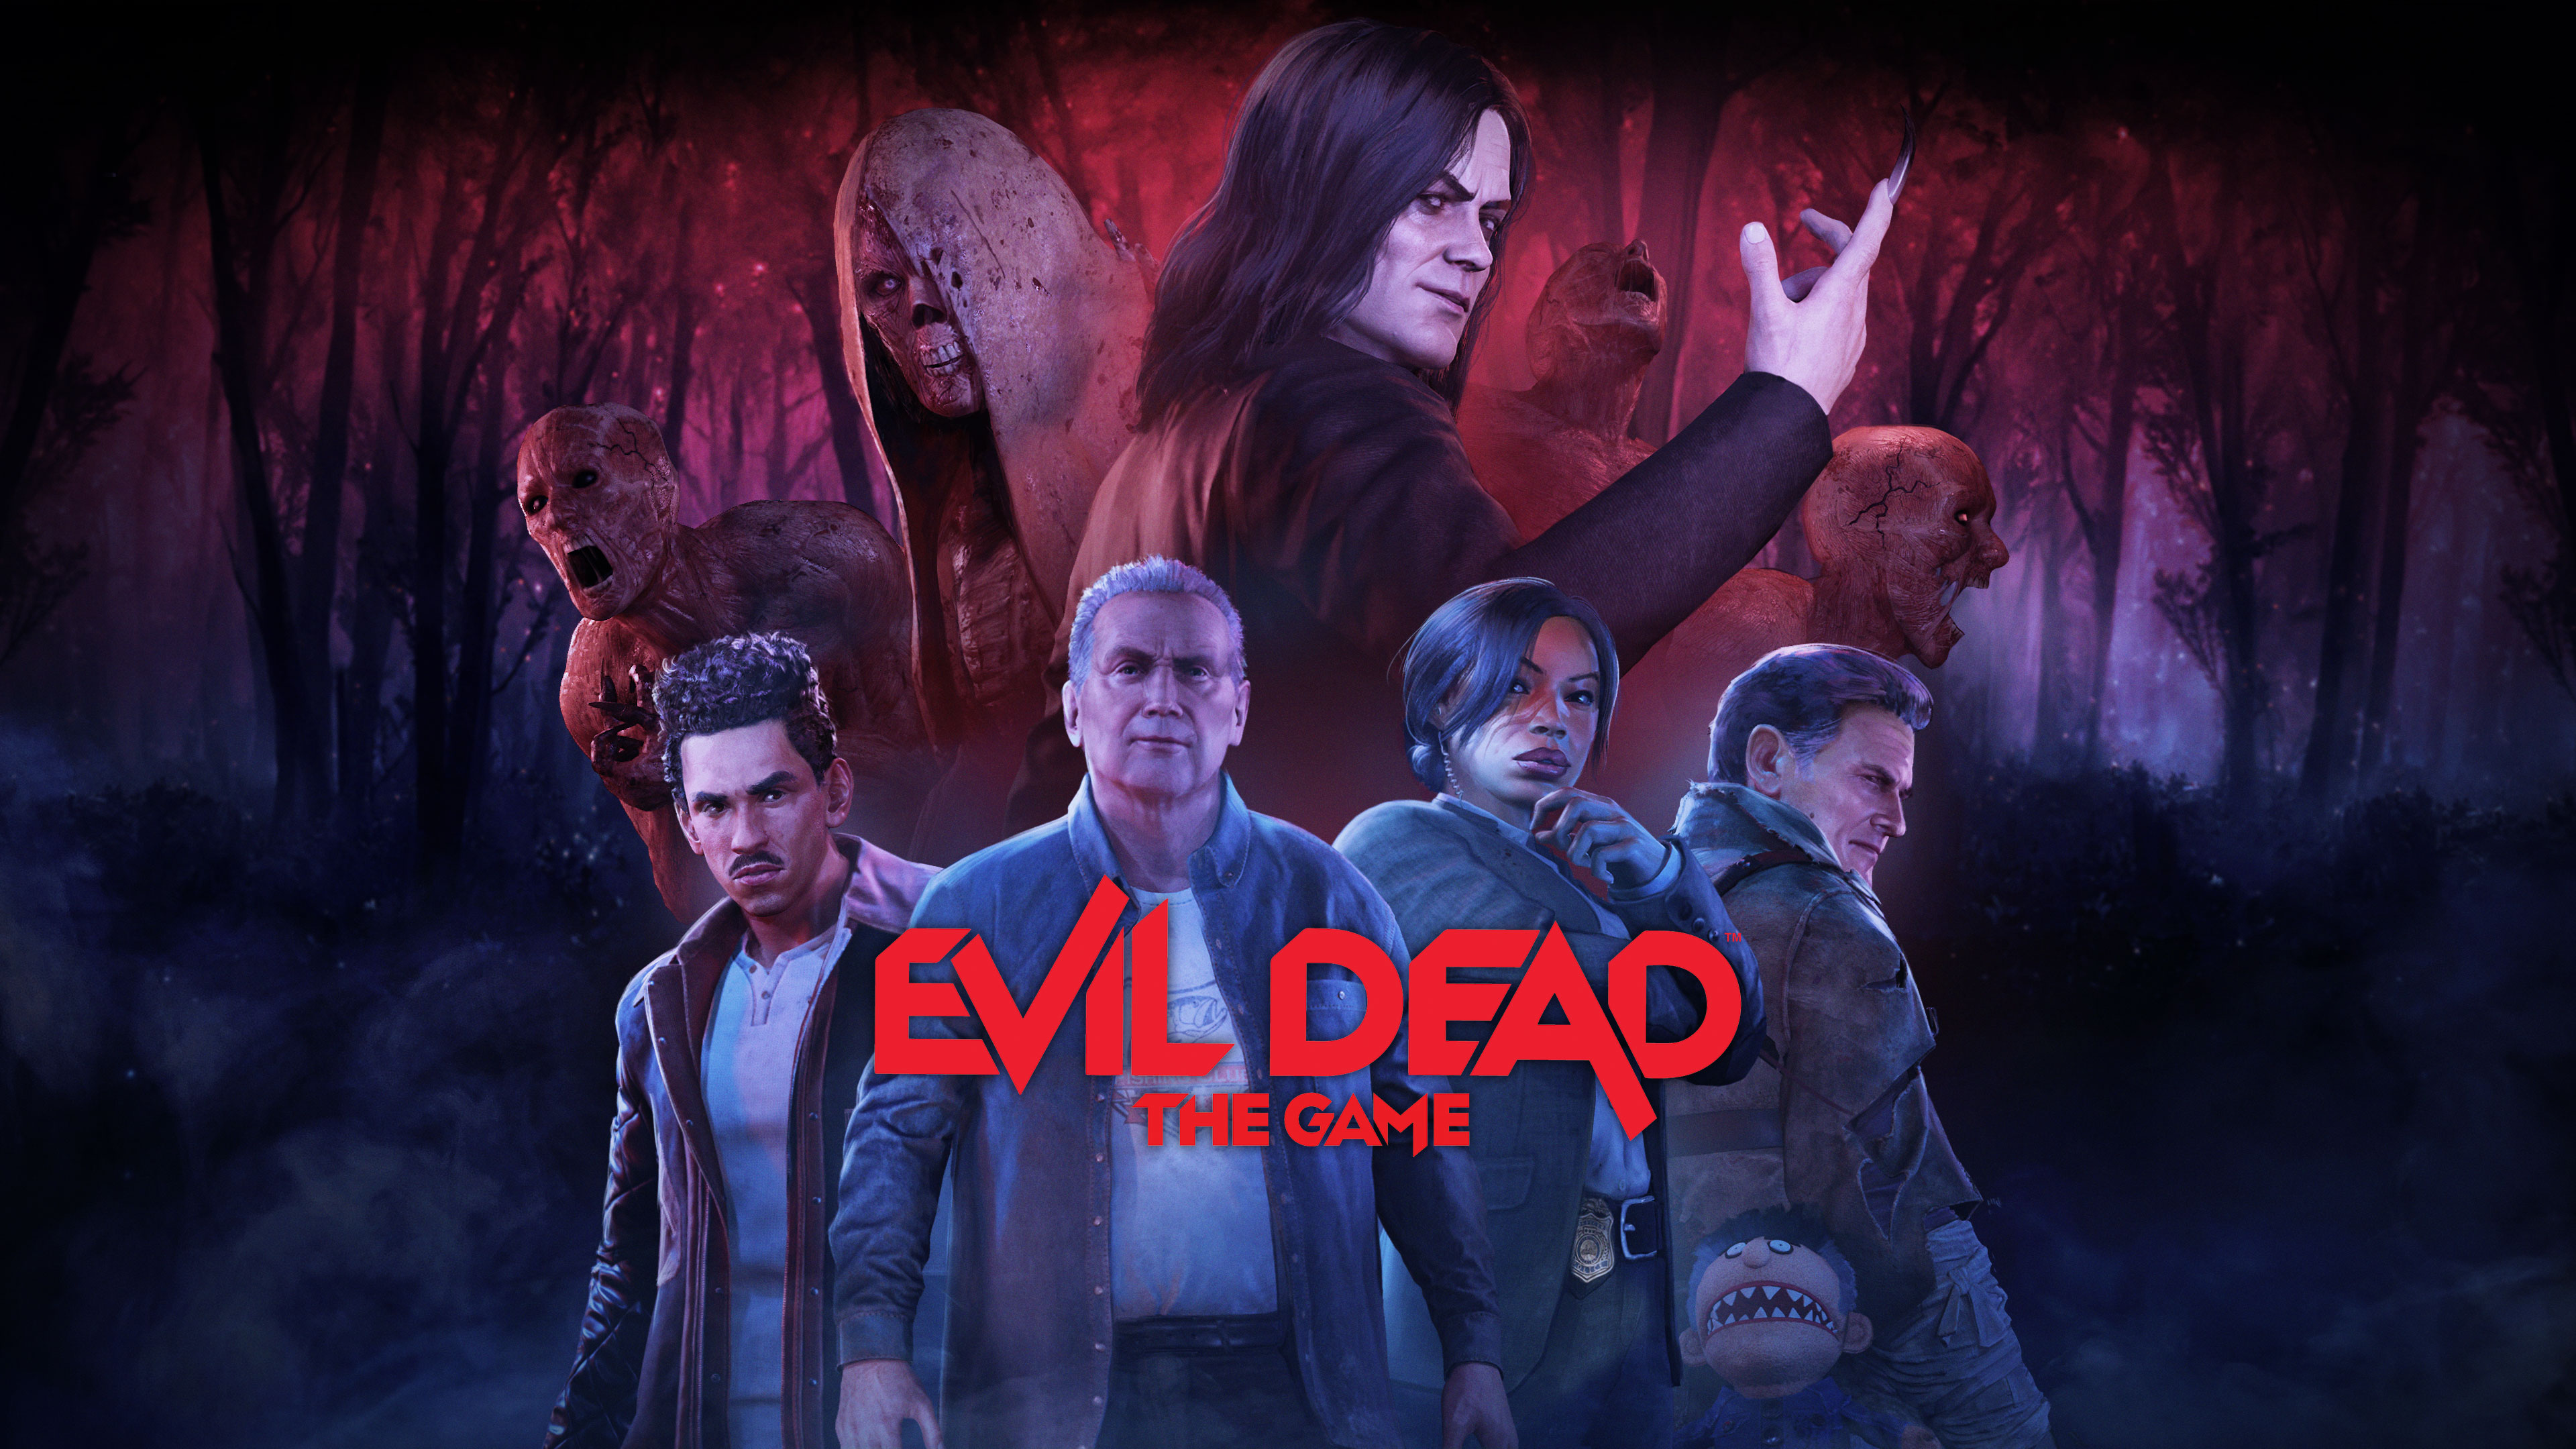 Evil Dead: The Game Release Date, Platforms, And Gameplay - What